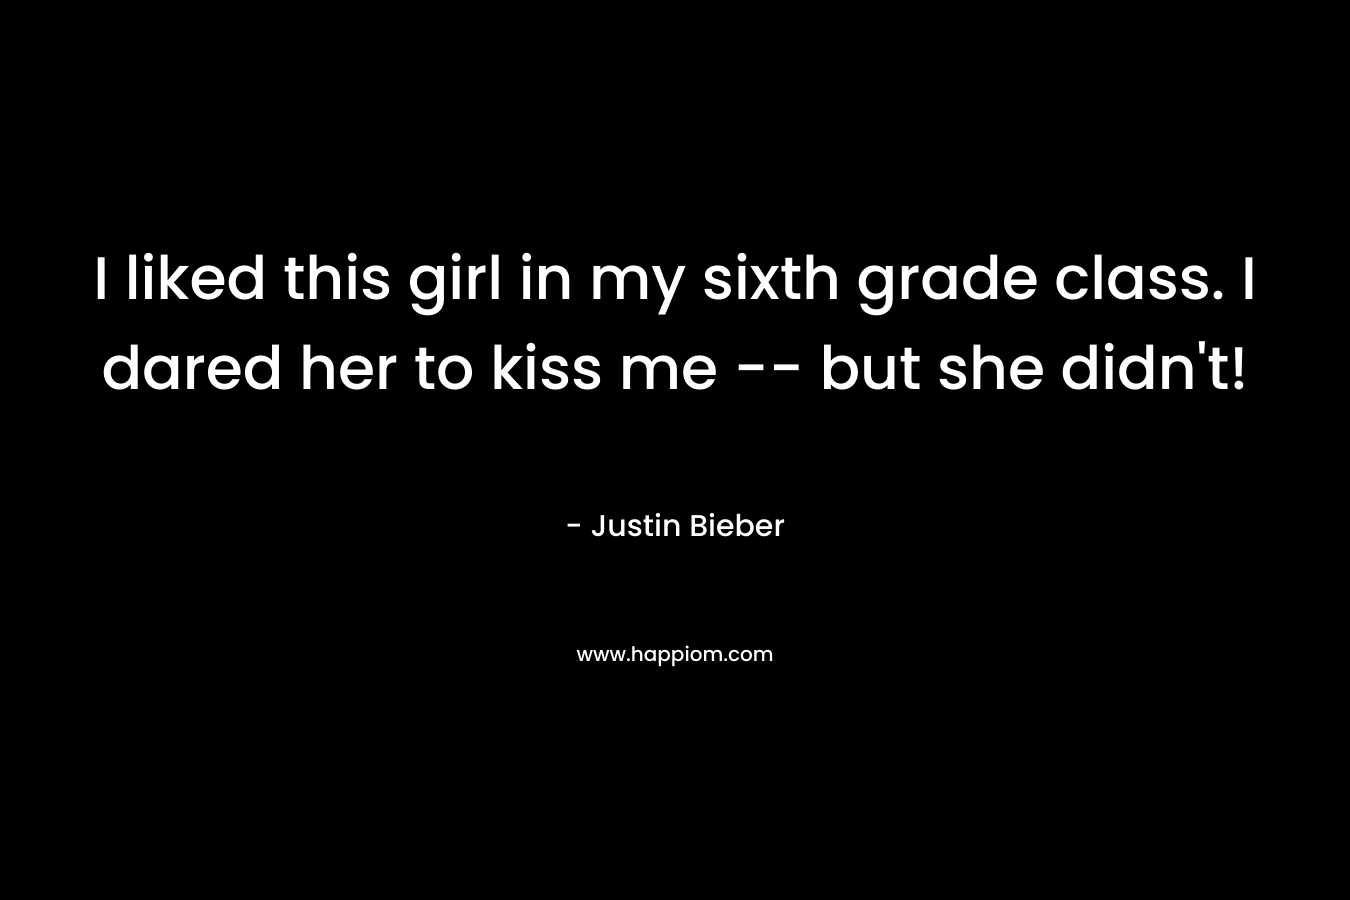 I liked this girl in my sixth grade class. I dared her to kiss me — but she didn’t! – Justin Bieber